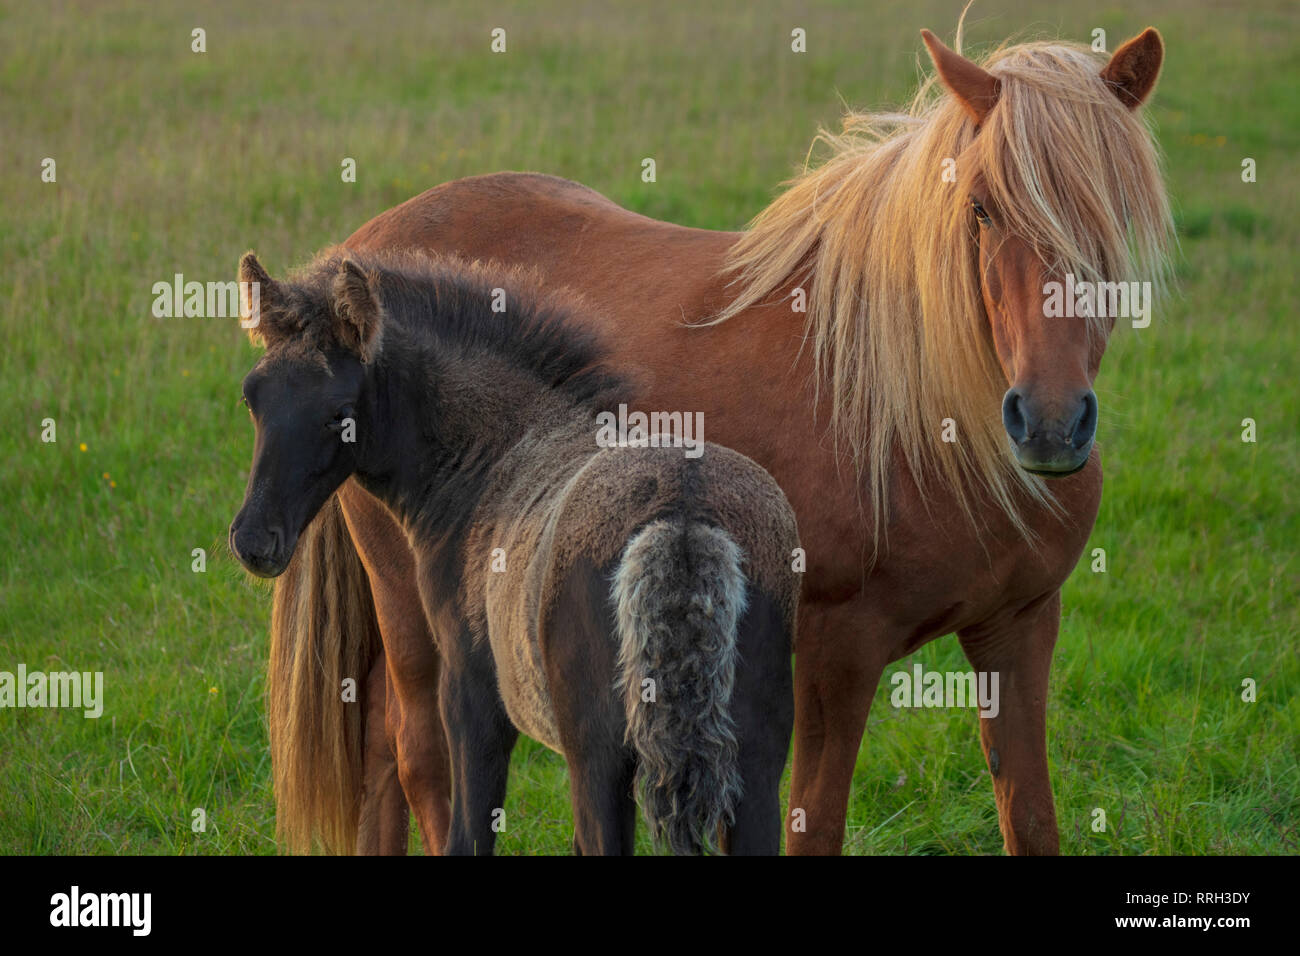 Icelandic horse and foal in a field near Hella, Sudhurland, Iceland. Stock Photo